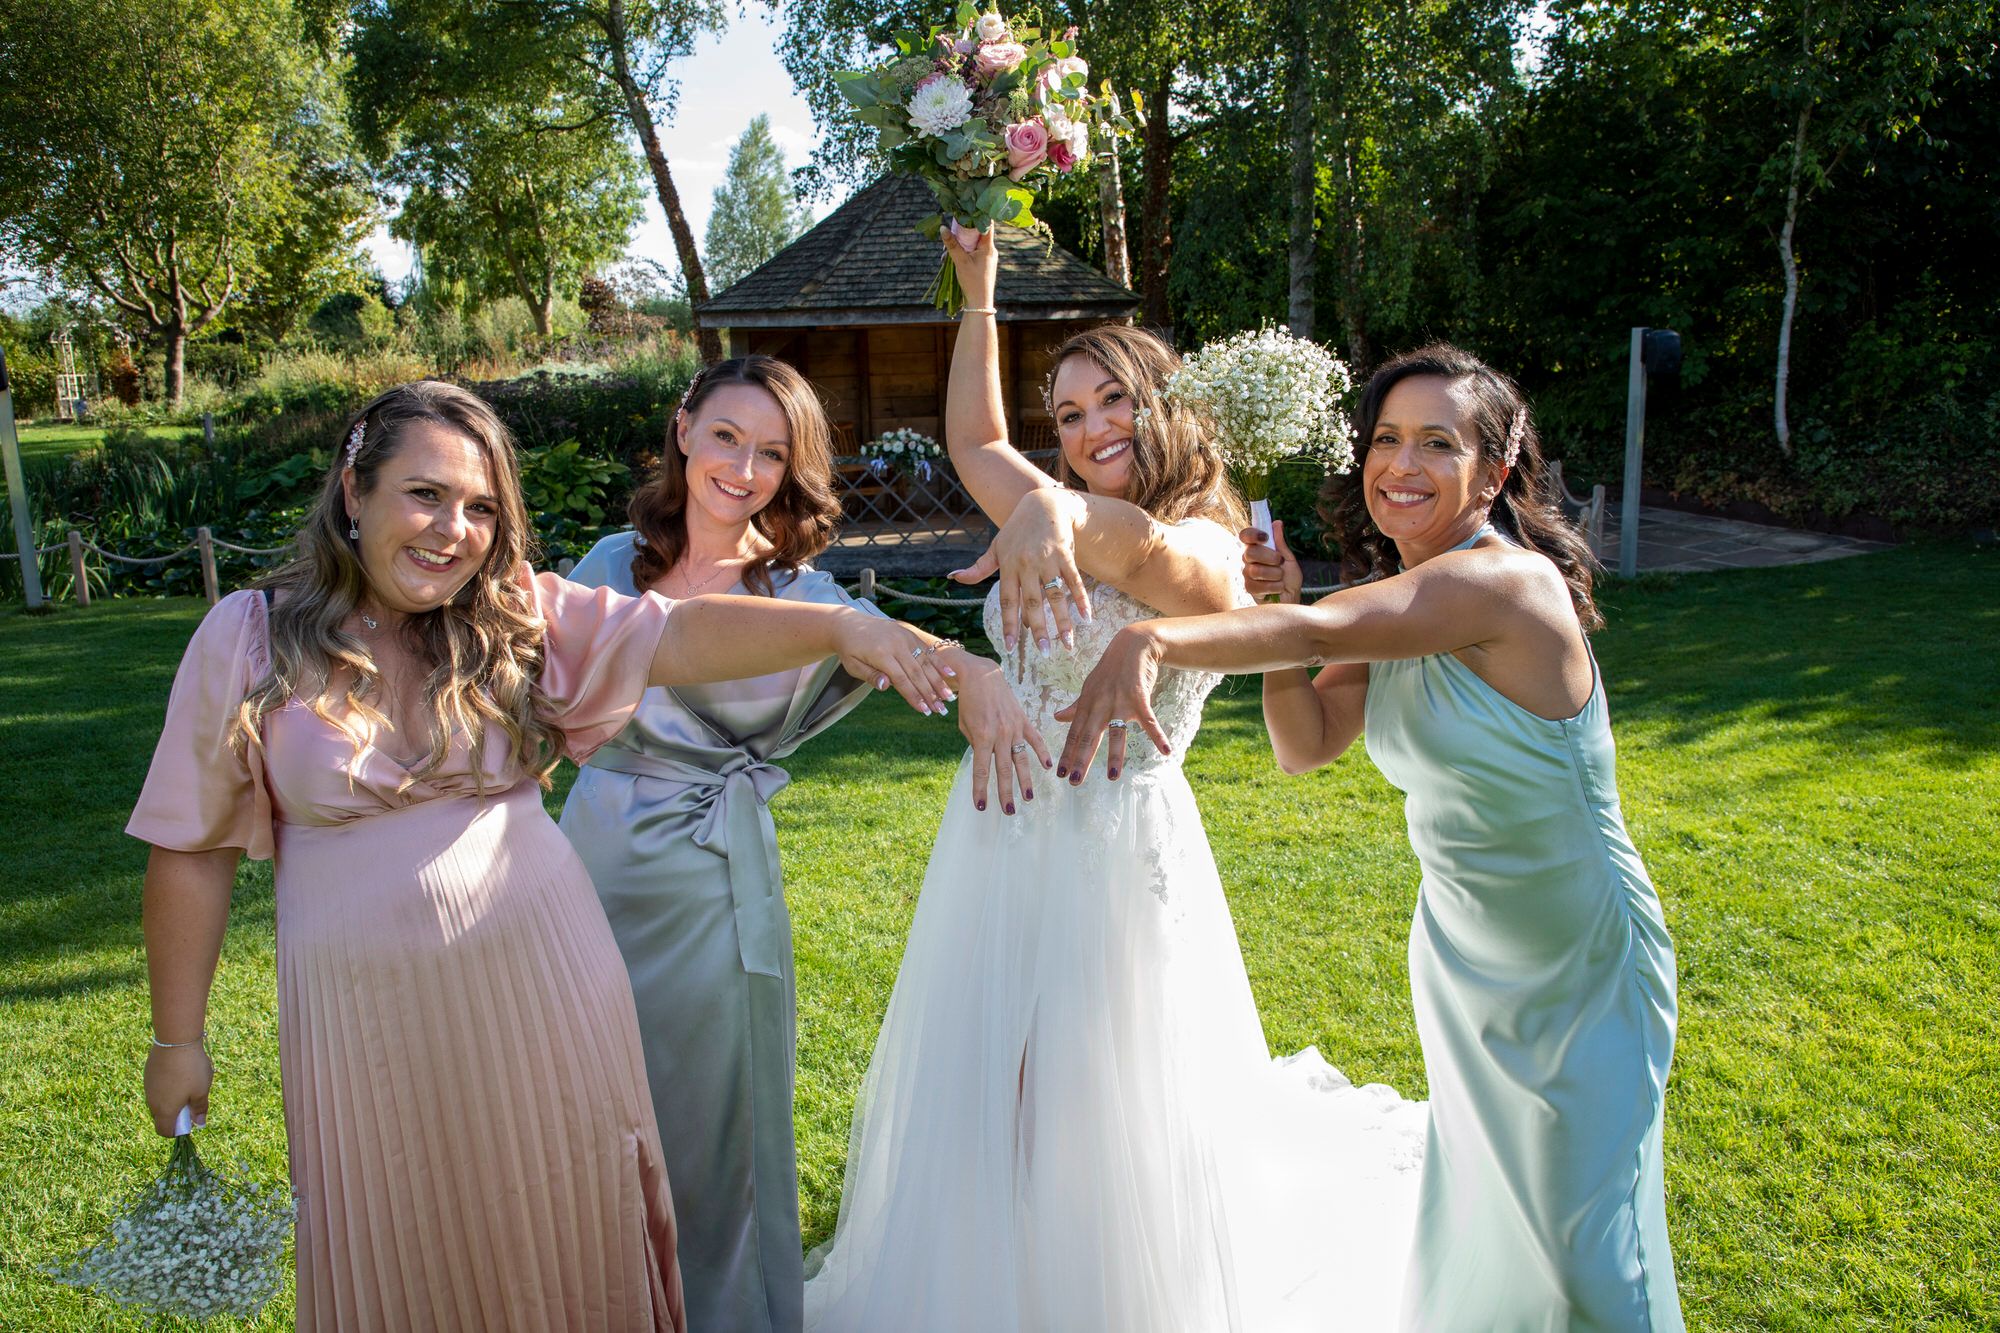 Joanna and her bridesmaids holding their ring hands in the centre - celebrating they are all married. Photo thanks to Nigel Charman Photography. 